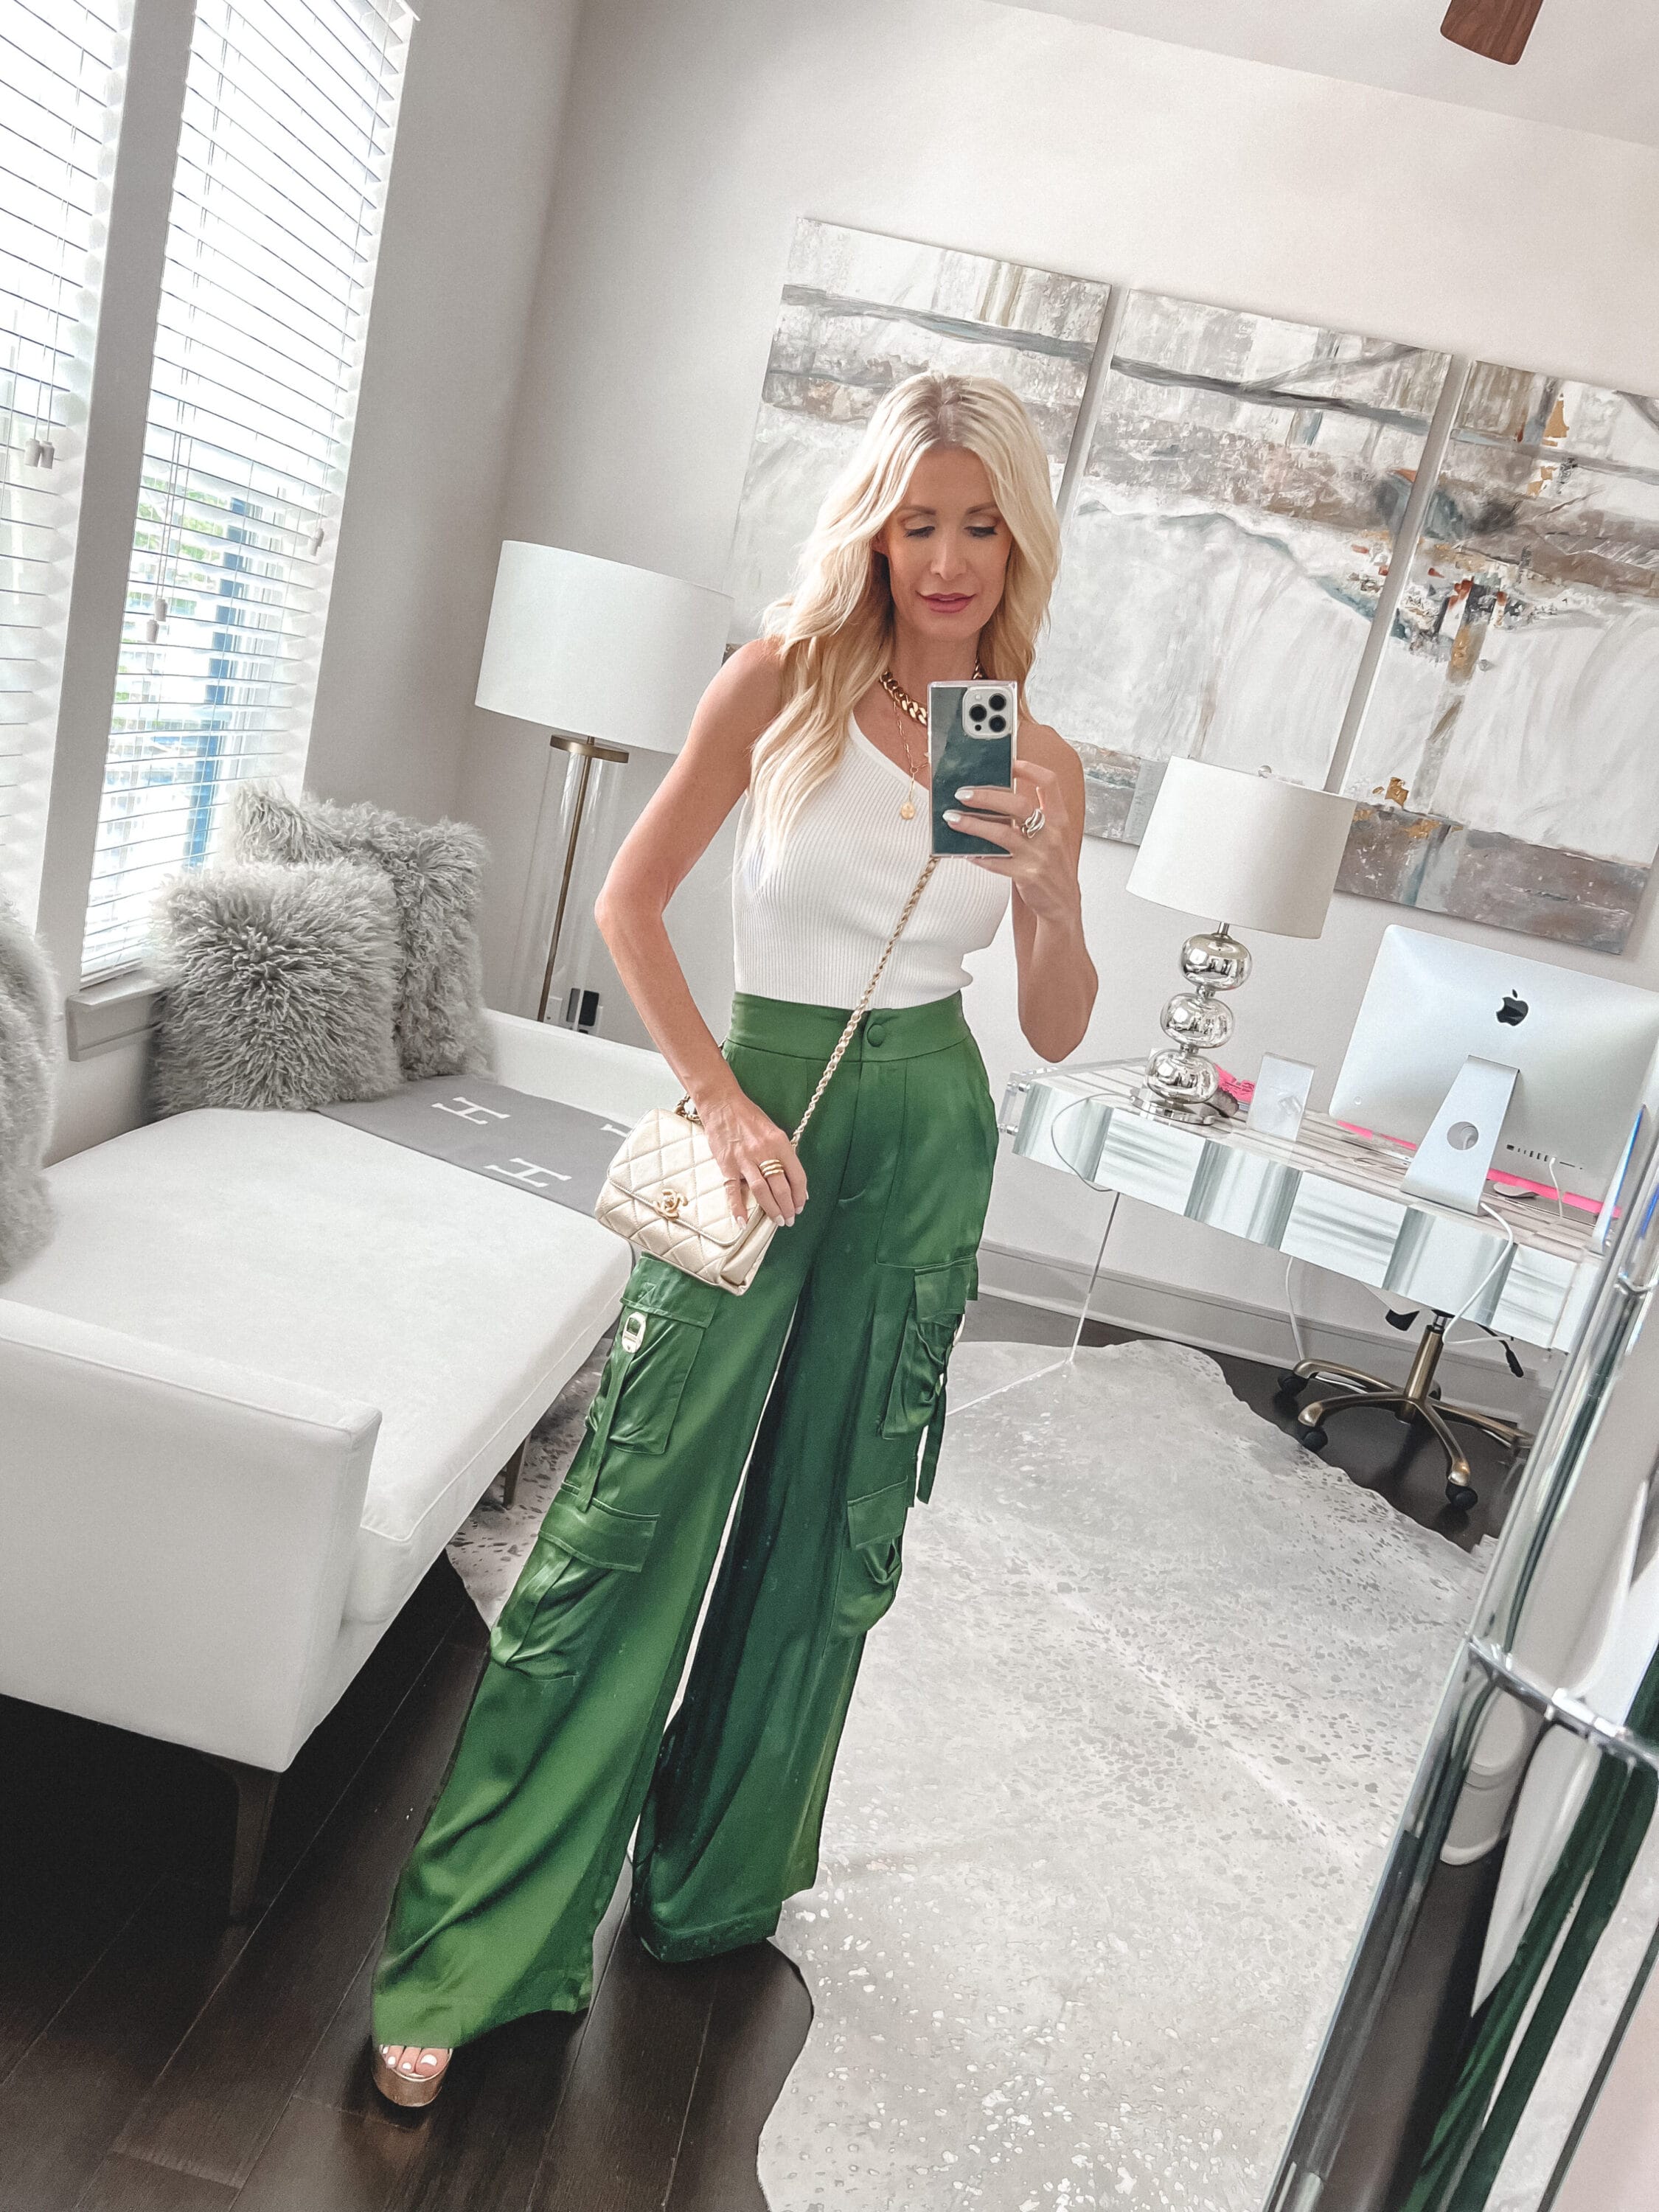 Over 40 fashion influencer wearing green satin cargo pants with a one shoulder top.